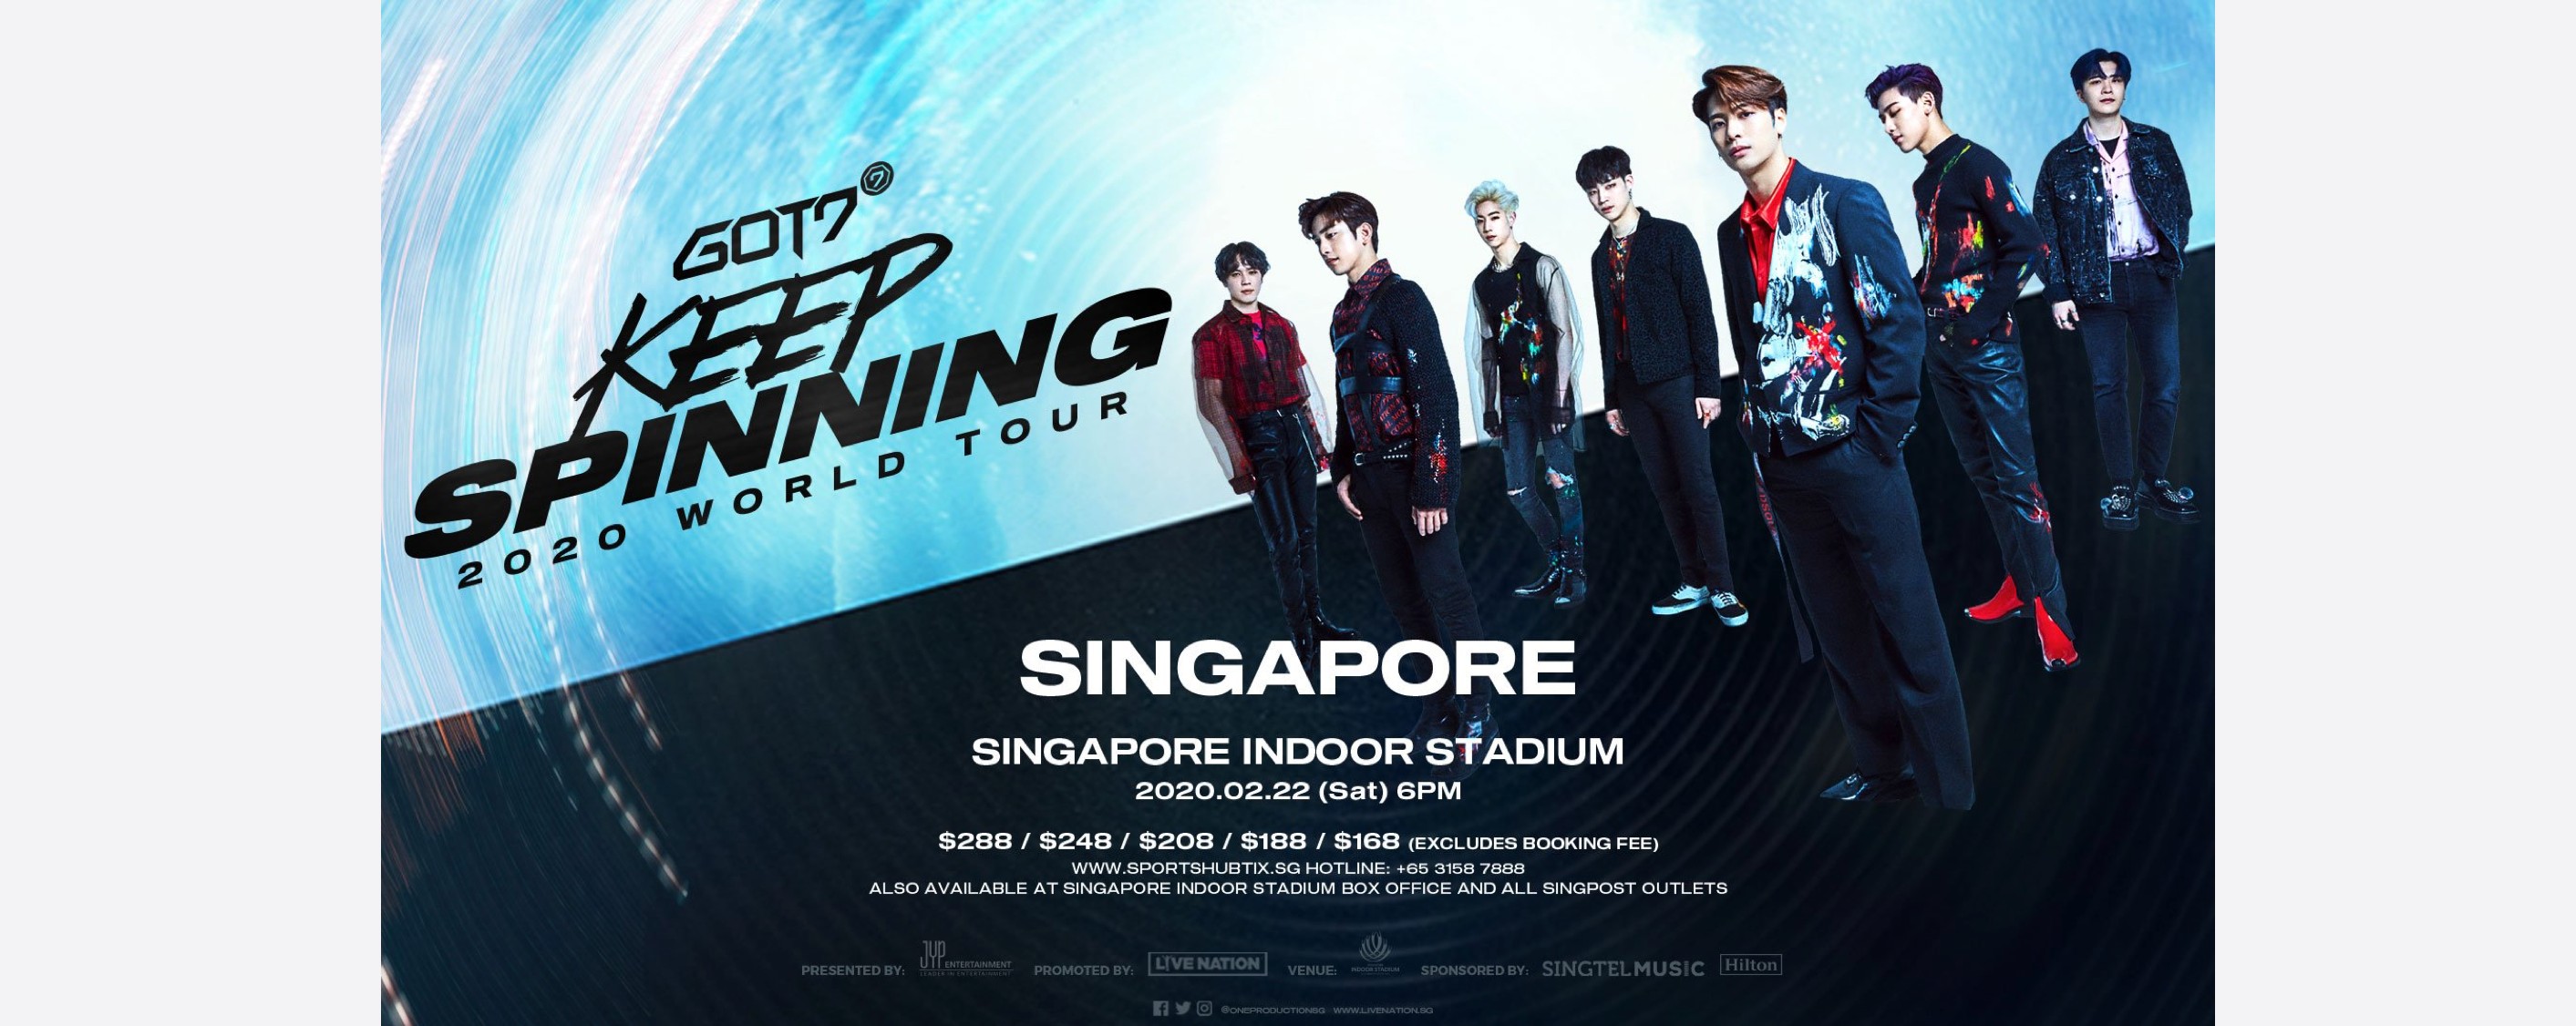 [CANCELLED] GOT7 2020 World Tour ‘Keep Spinning’ in Singapore